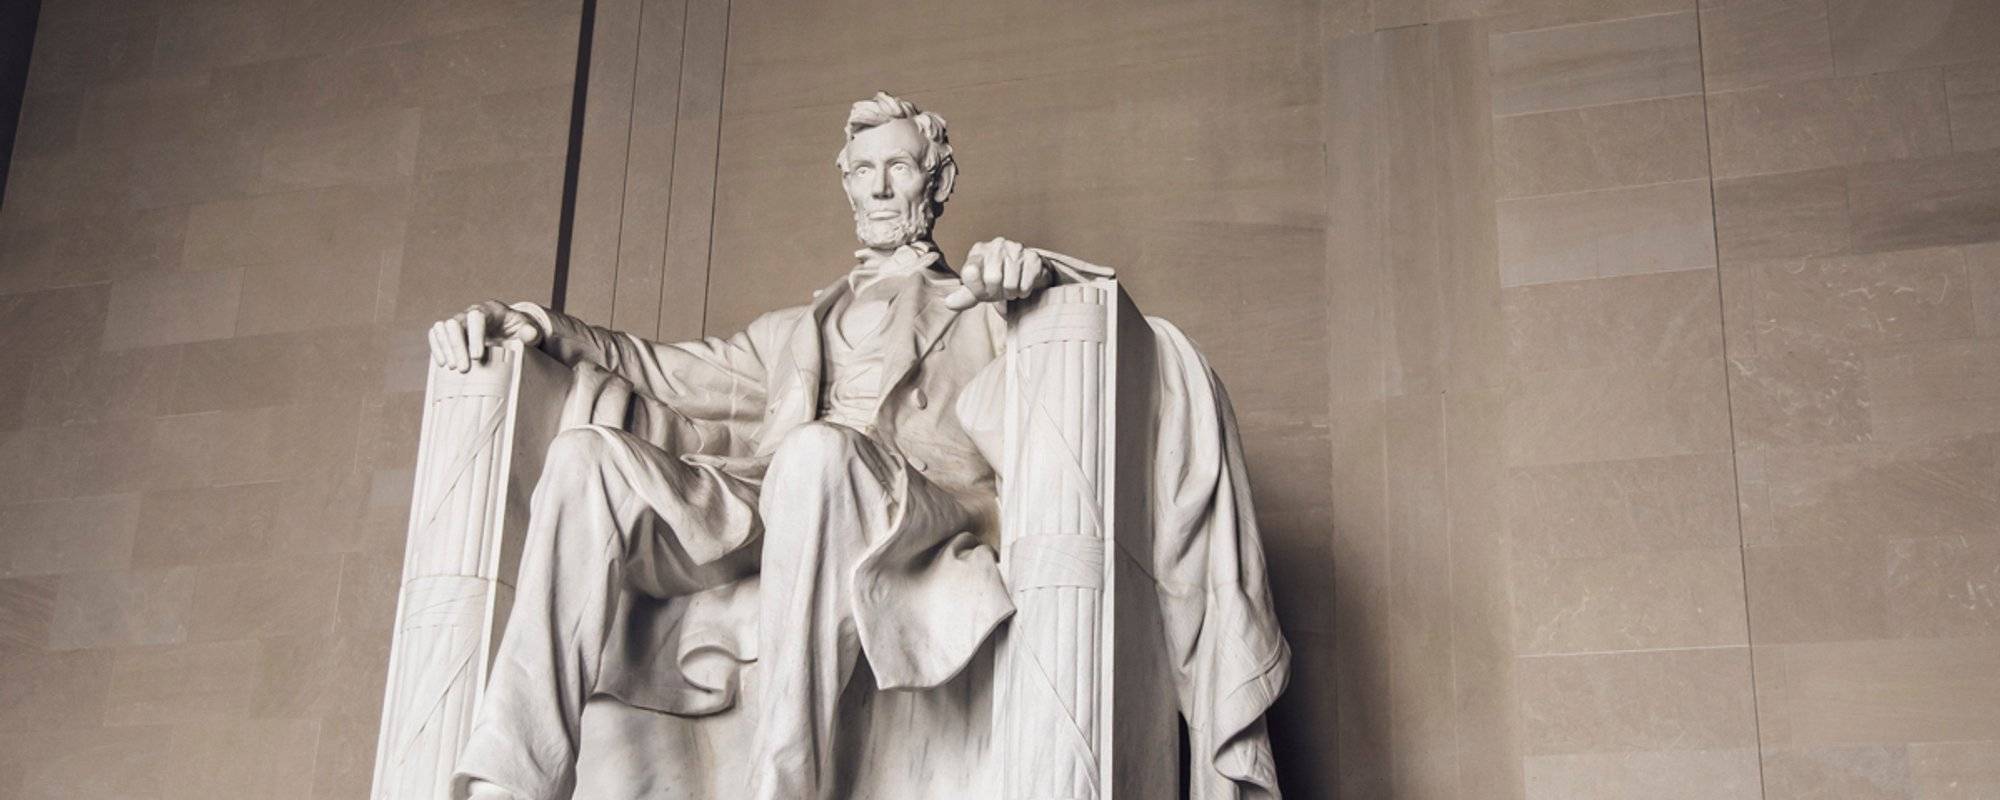 Visiting the Lincoln Memorial in Washington DC